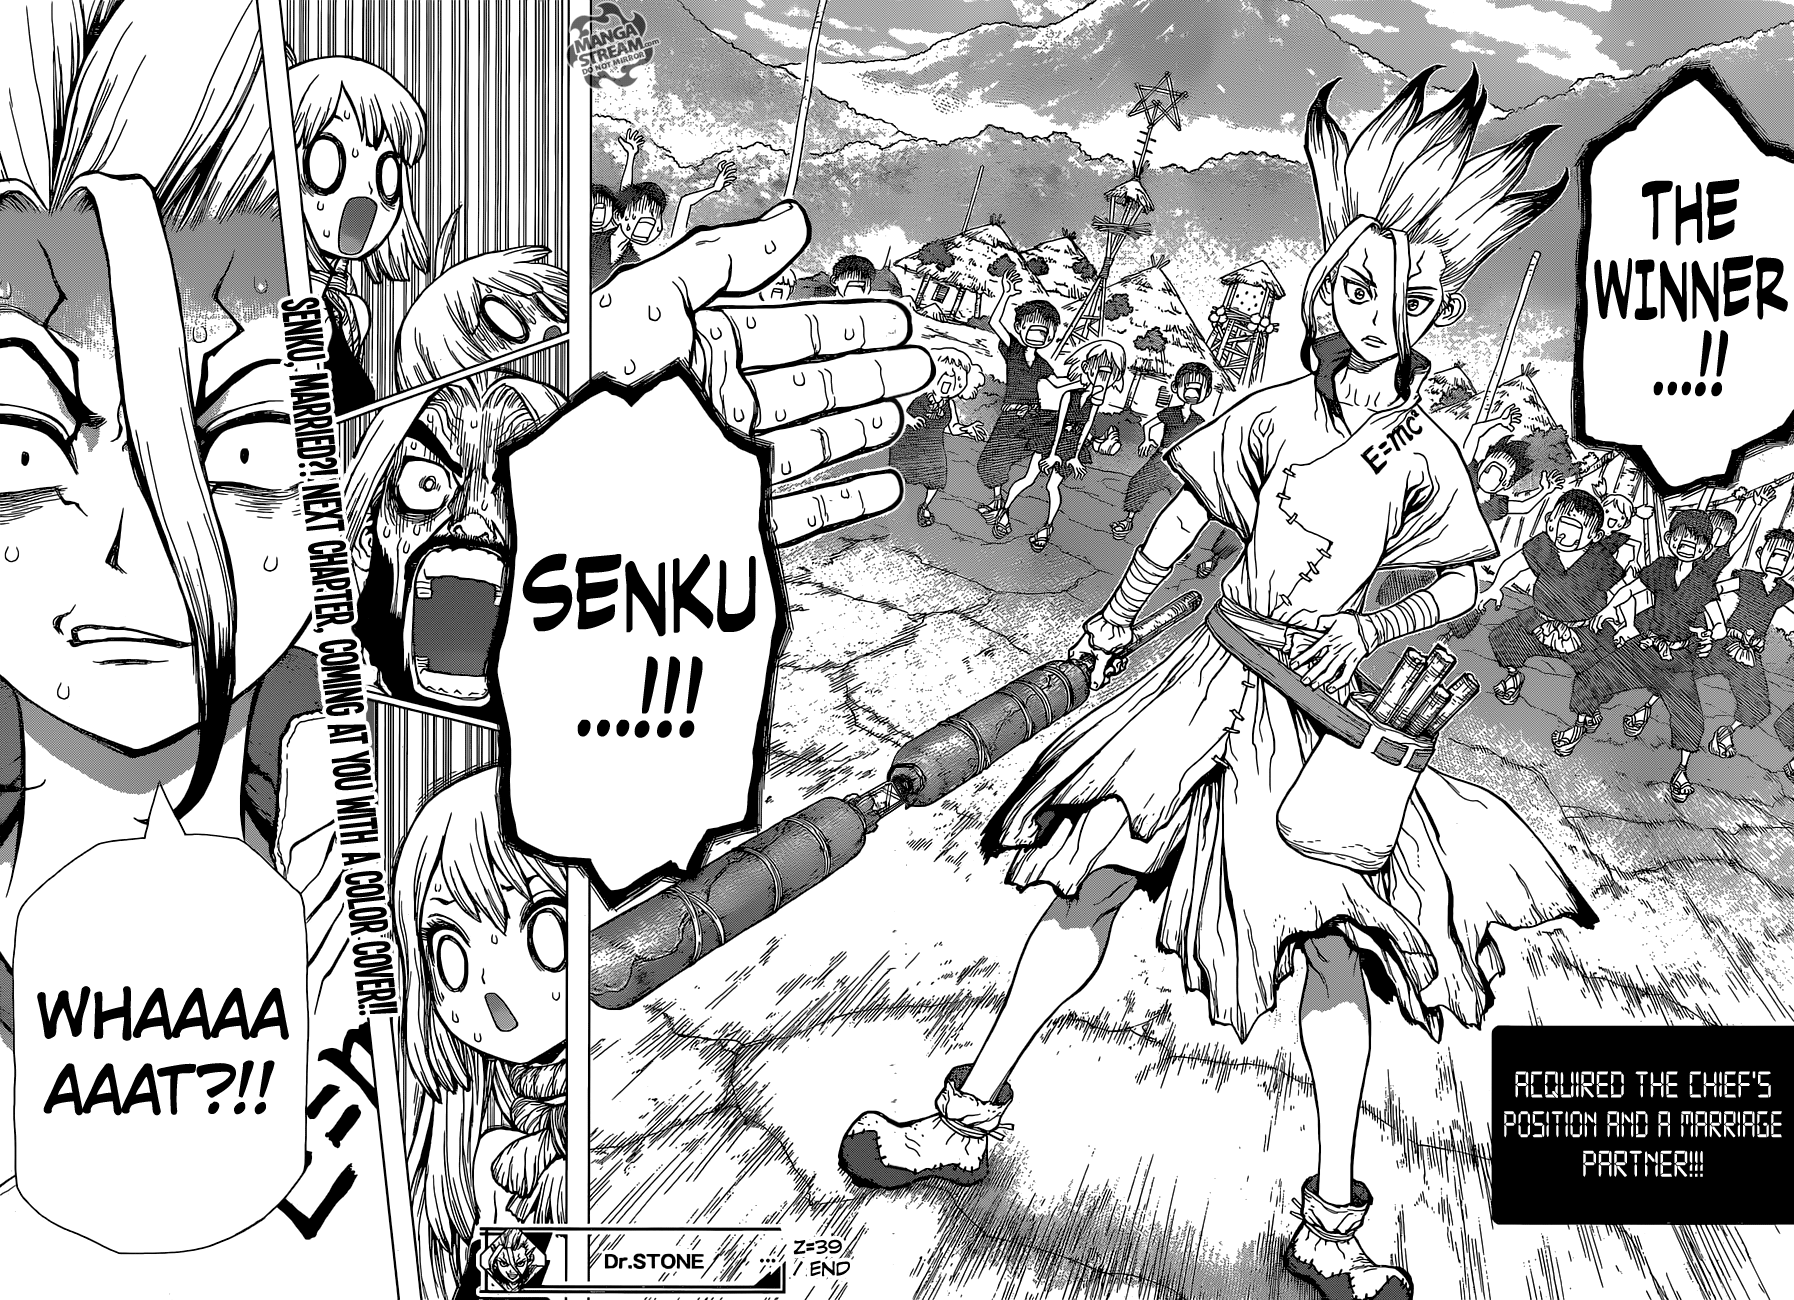 Dr. Stone Chapter 39